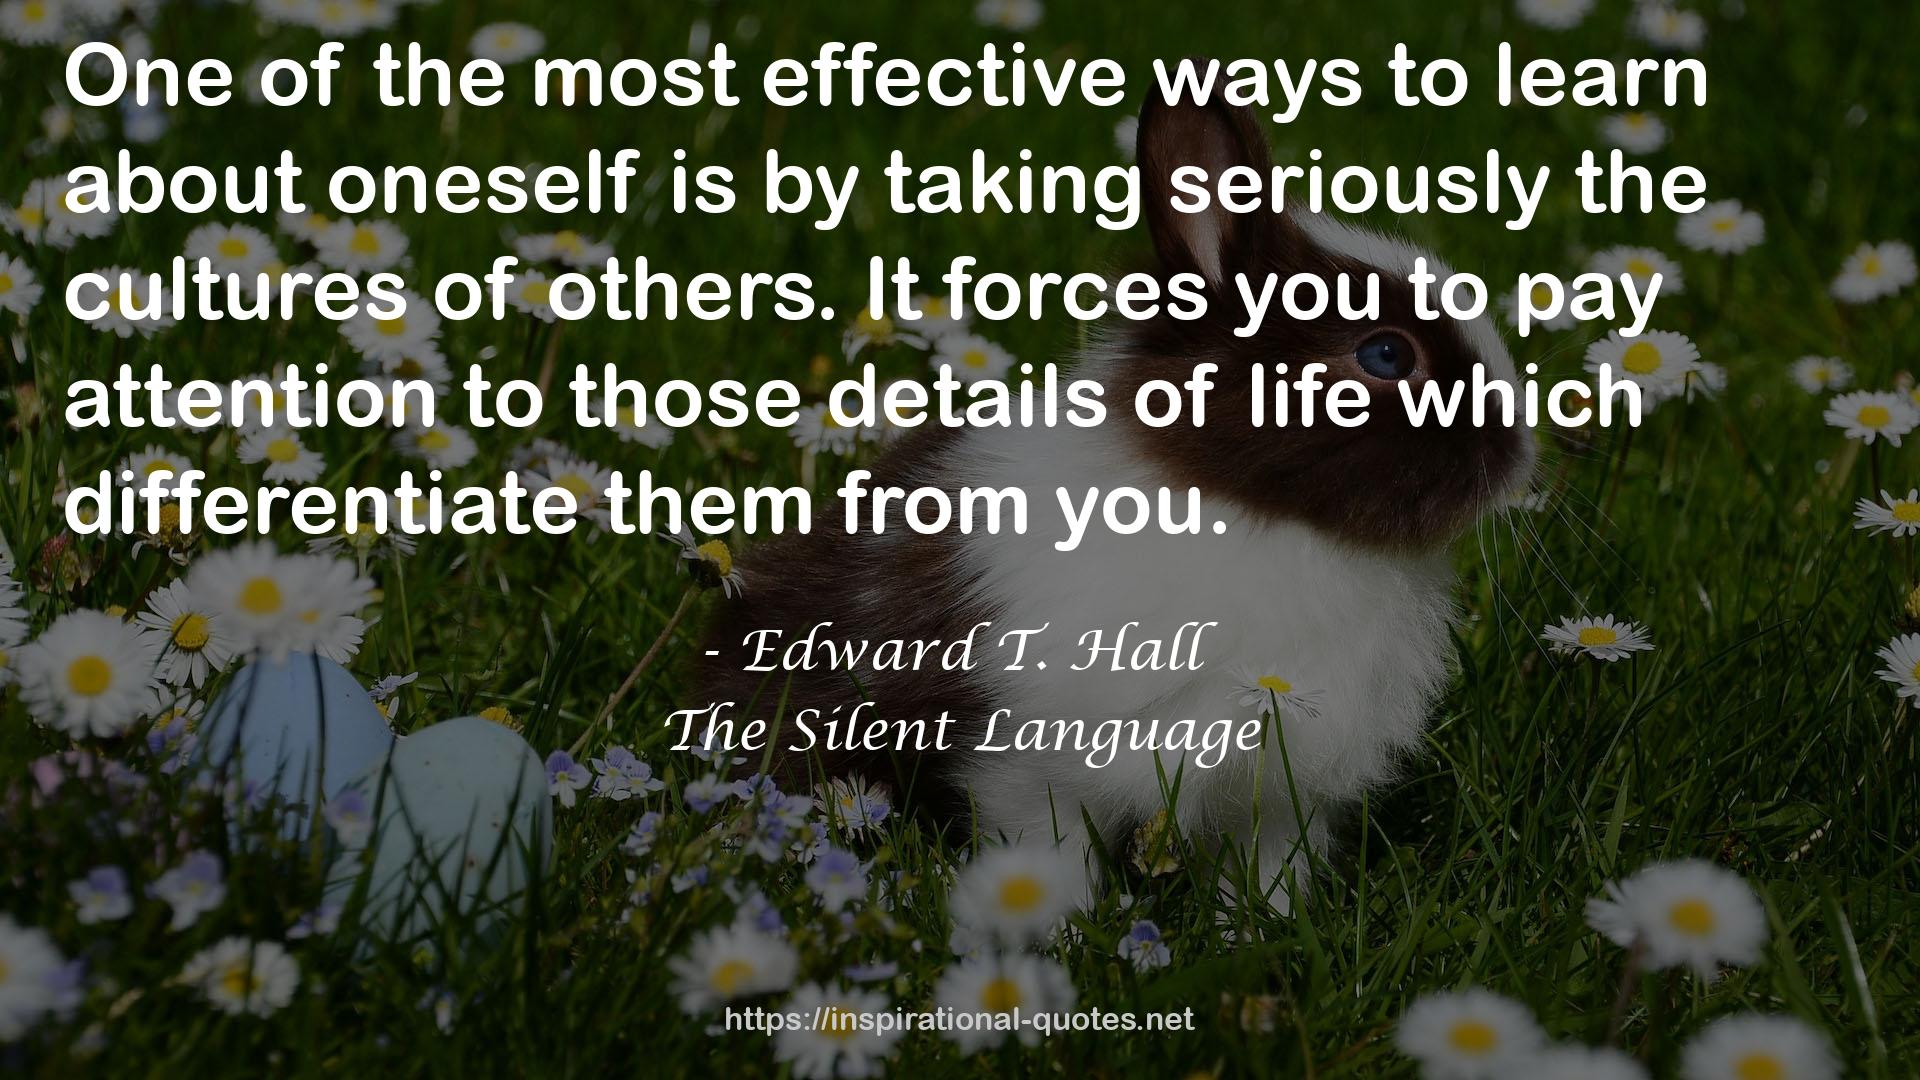 Edward T. Hall QUOTES